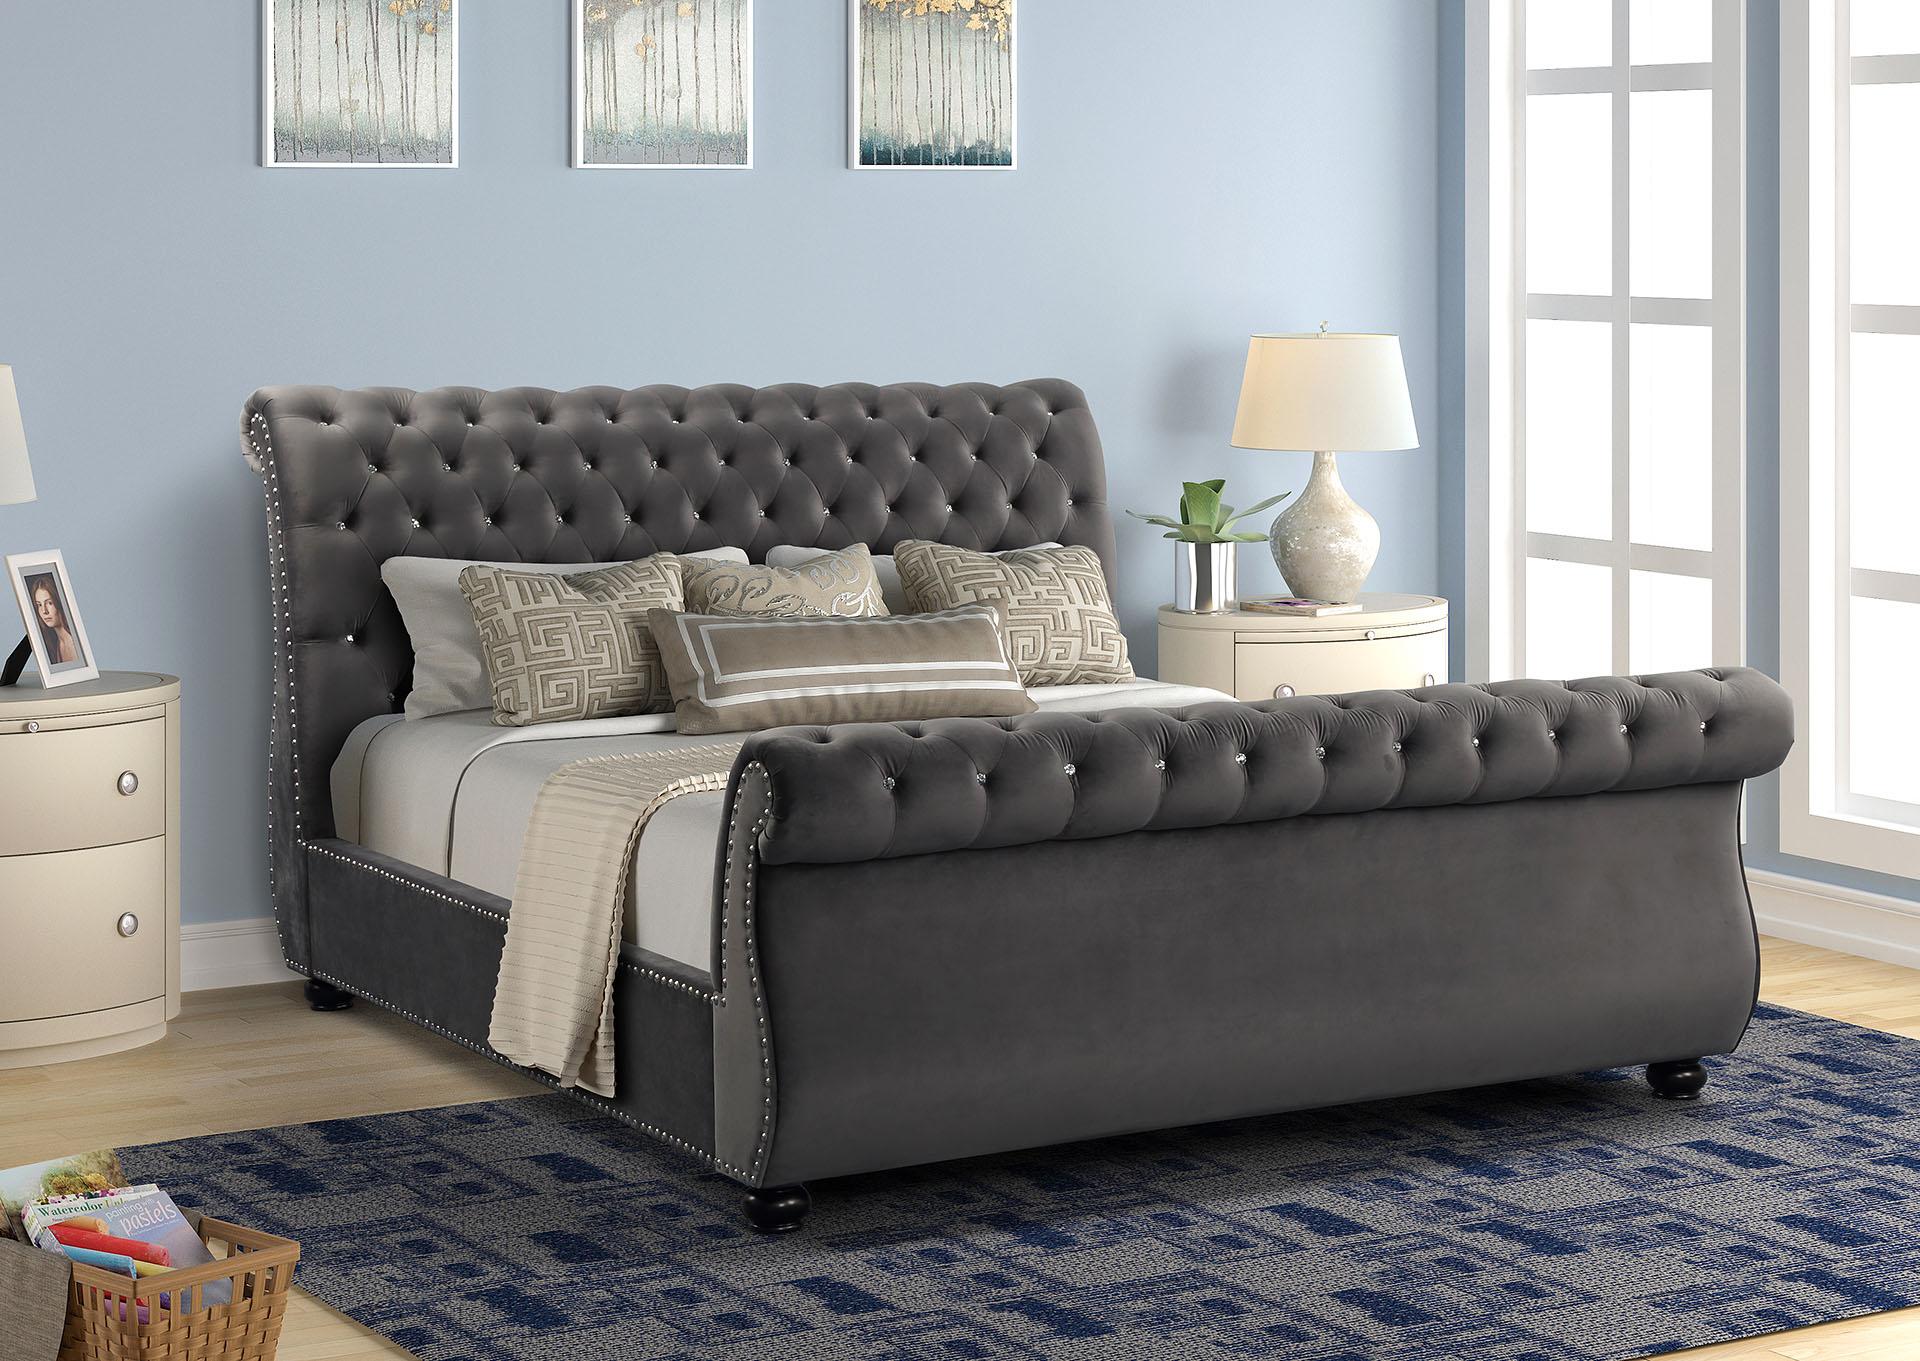 Contemporary, Modern Sleigh Bed KENDALL GHF-808857701923 in Gray 